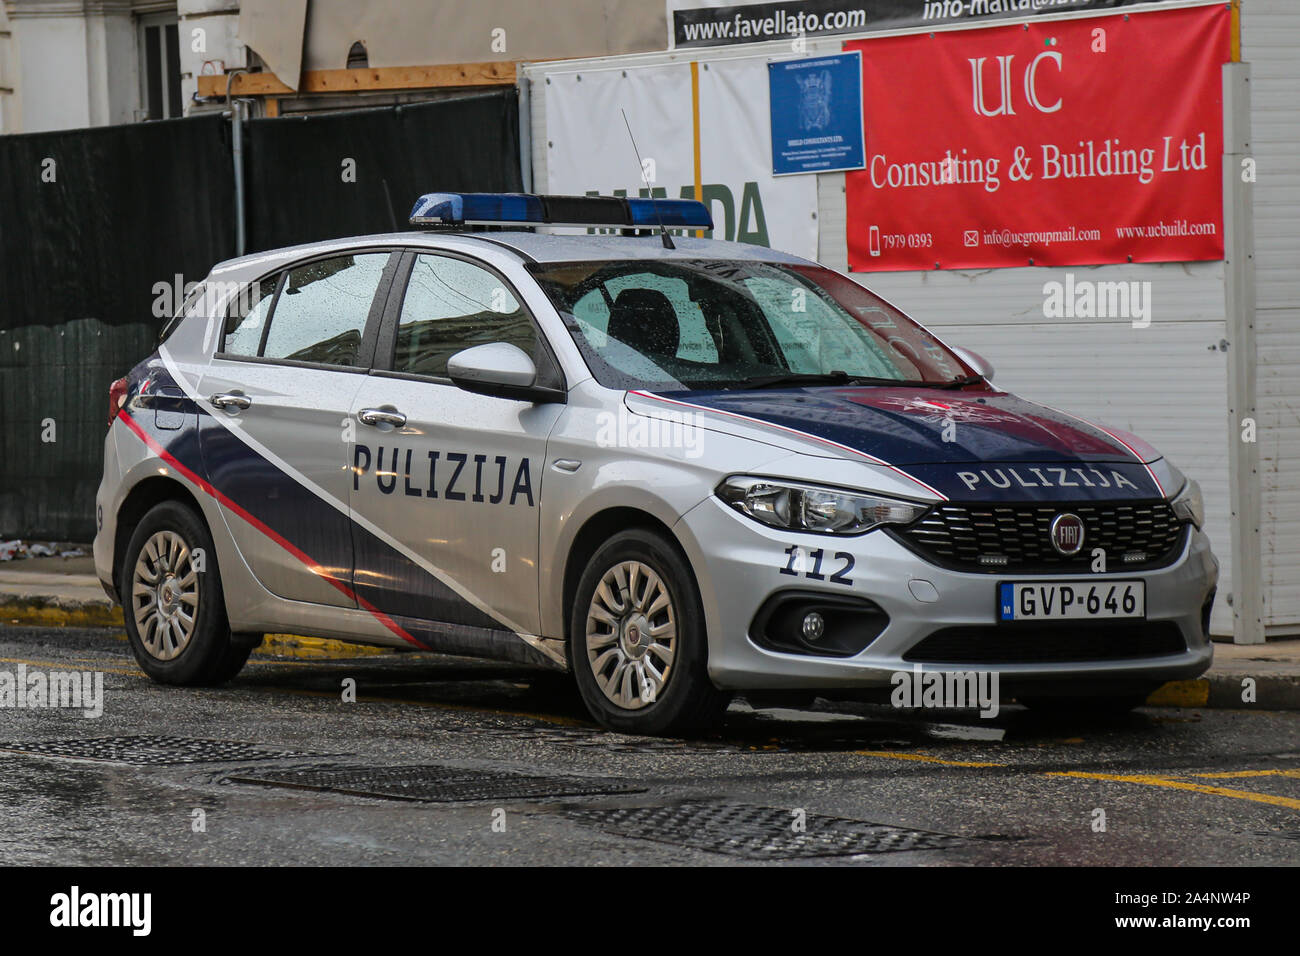 A general view of a Malta Police Force Fiat Tipo Pulizija Police District Vehicle in Sliema, on the island of Malta Stock Photo